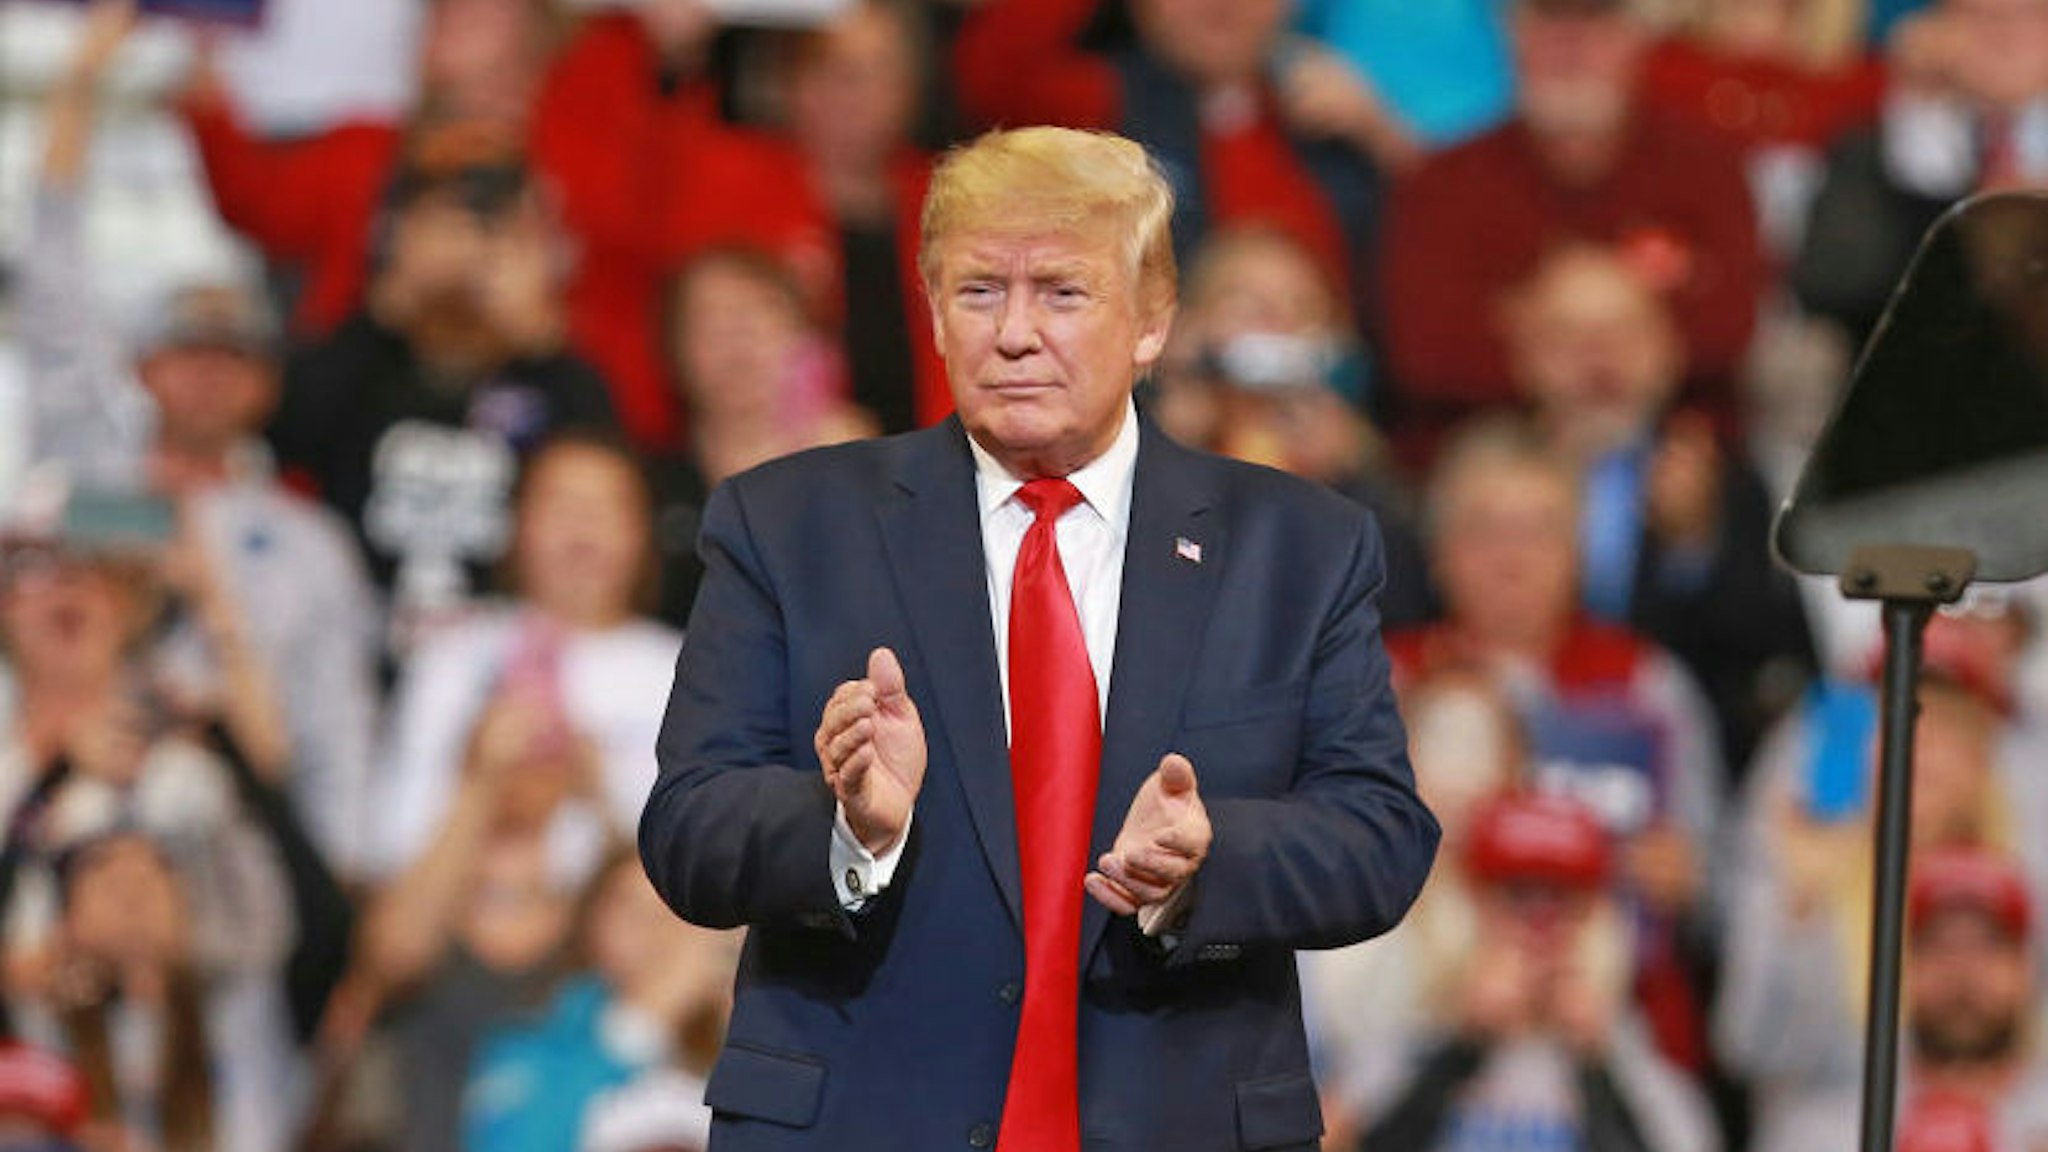 BOSSIER CITY, LOUISIANA - NOVEMBER 14: U.S. President Donald Trump attends a rally at CenturyLink Center on November 14, 2019 in Bossier City, Louisiana. President Trump headlined the rally to support Louisiana Republican gubernatorial candidate Eddie Rispone, who is looking to unseat incumbent Democratic Gov. John Bel Edwards.